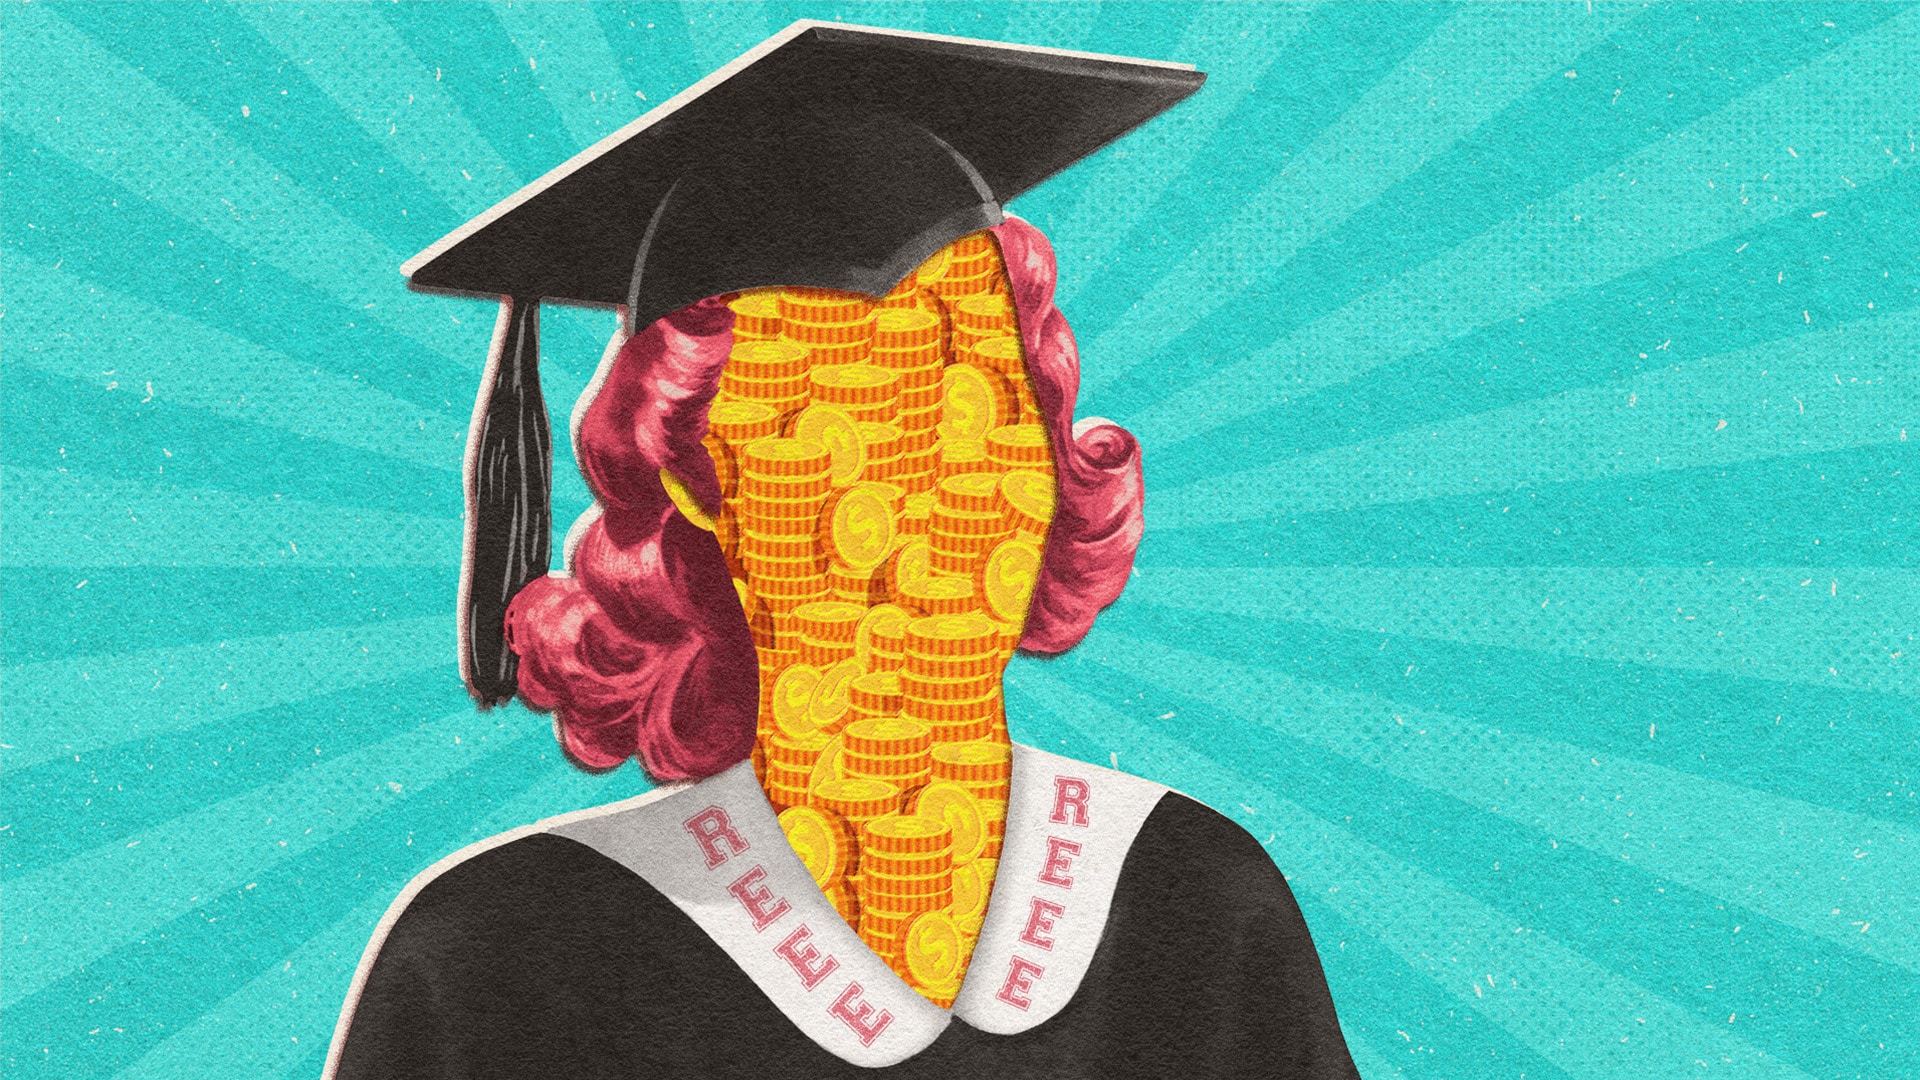 Illustration of a college graduate with pink hair, and coins in place of their face. The letters "REEE" appear on her graduation robe.